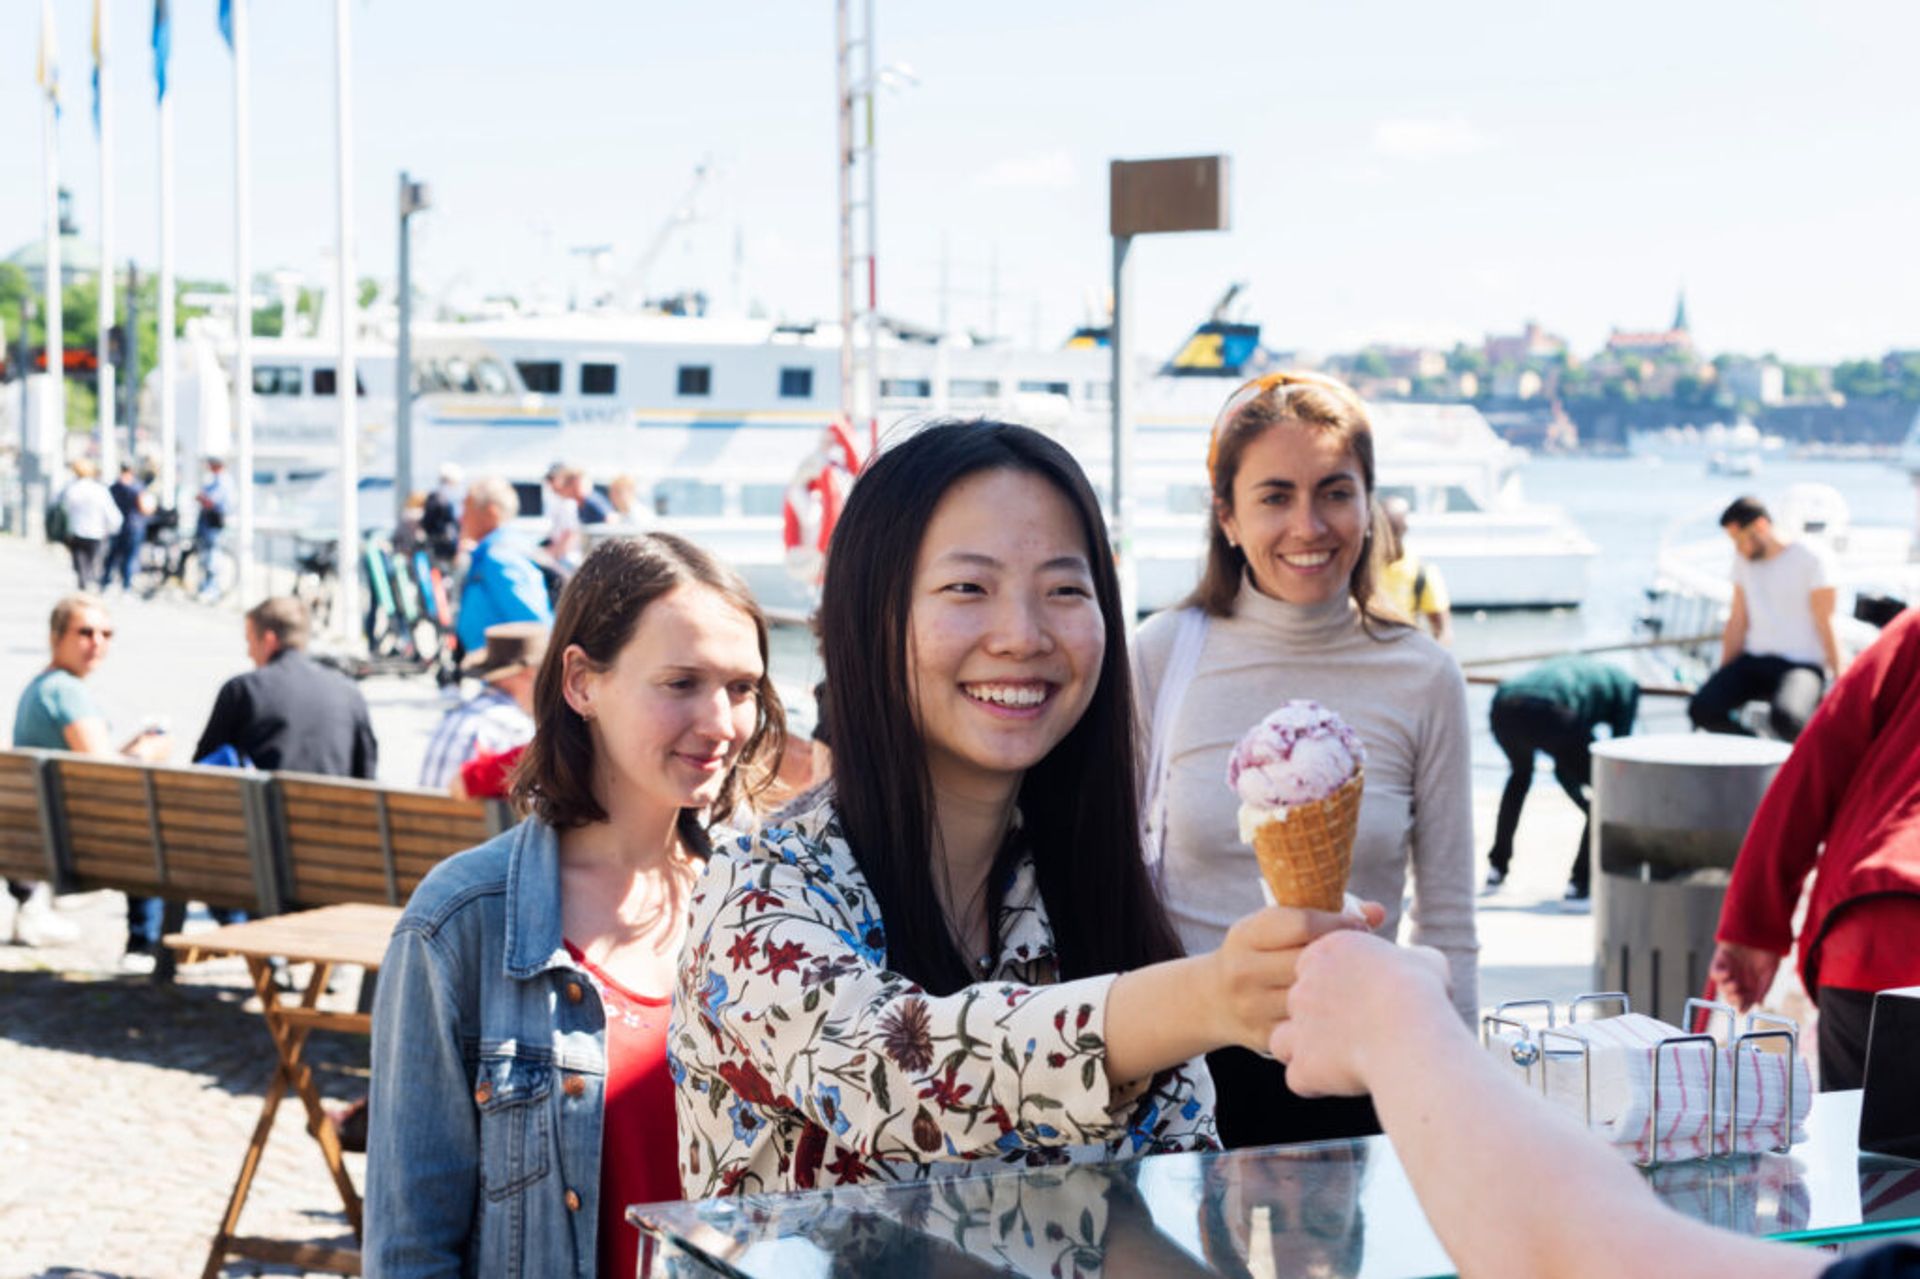 international students looking happy in a harbour in Stockholm, buying ice cream